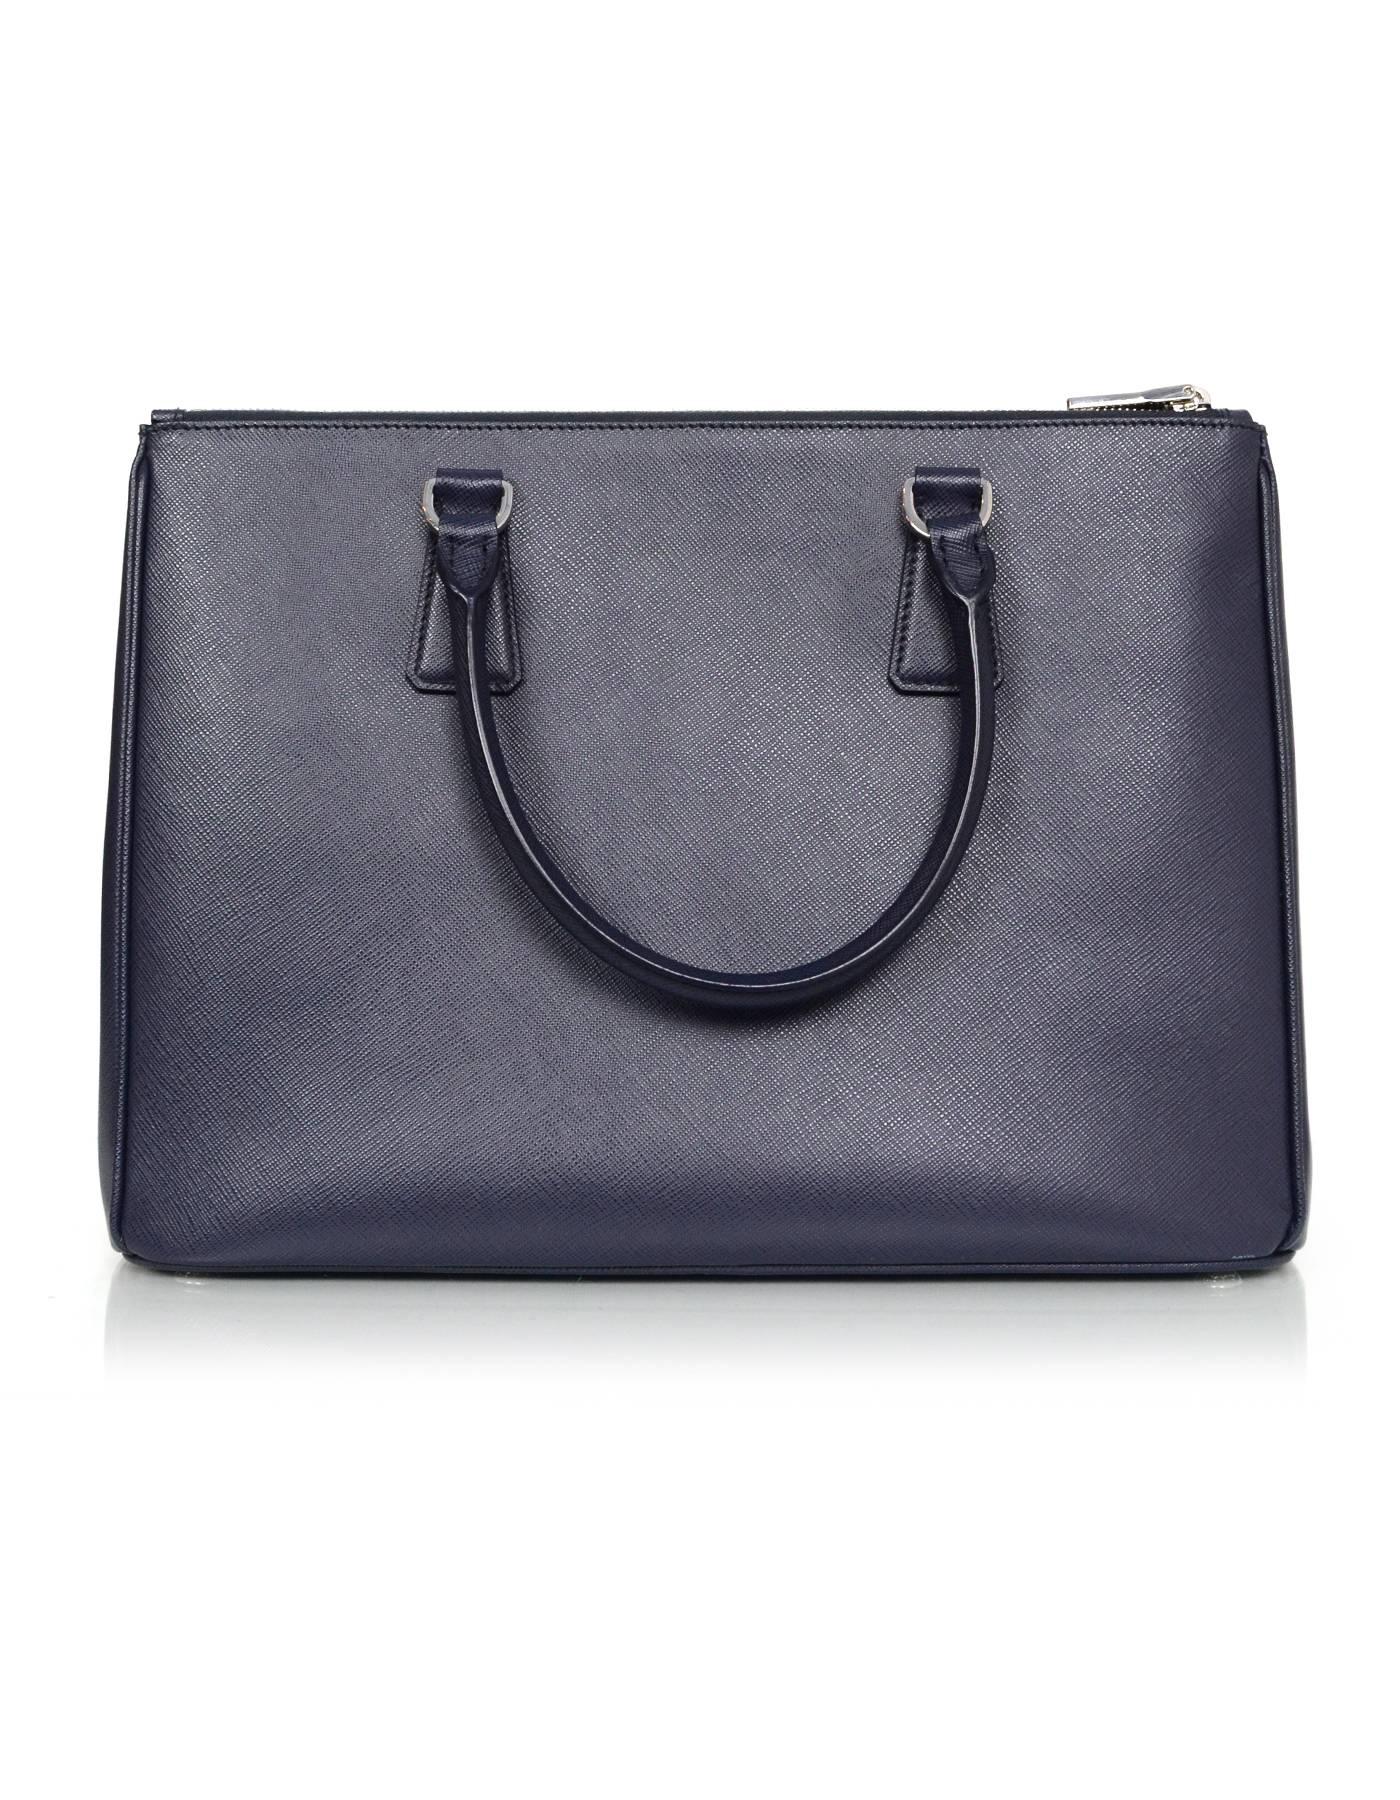 100% Authentic Prada baltico navy saffiano leather 1BA274 medium tote bag. Features double zip compartment and detachable shoulder/crossbody strap

Made In: Italy
Color: Blue blatico
Hardware: Silvertone
Materials: Saffiano textured leather
Lining: